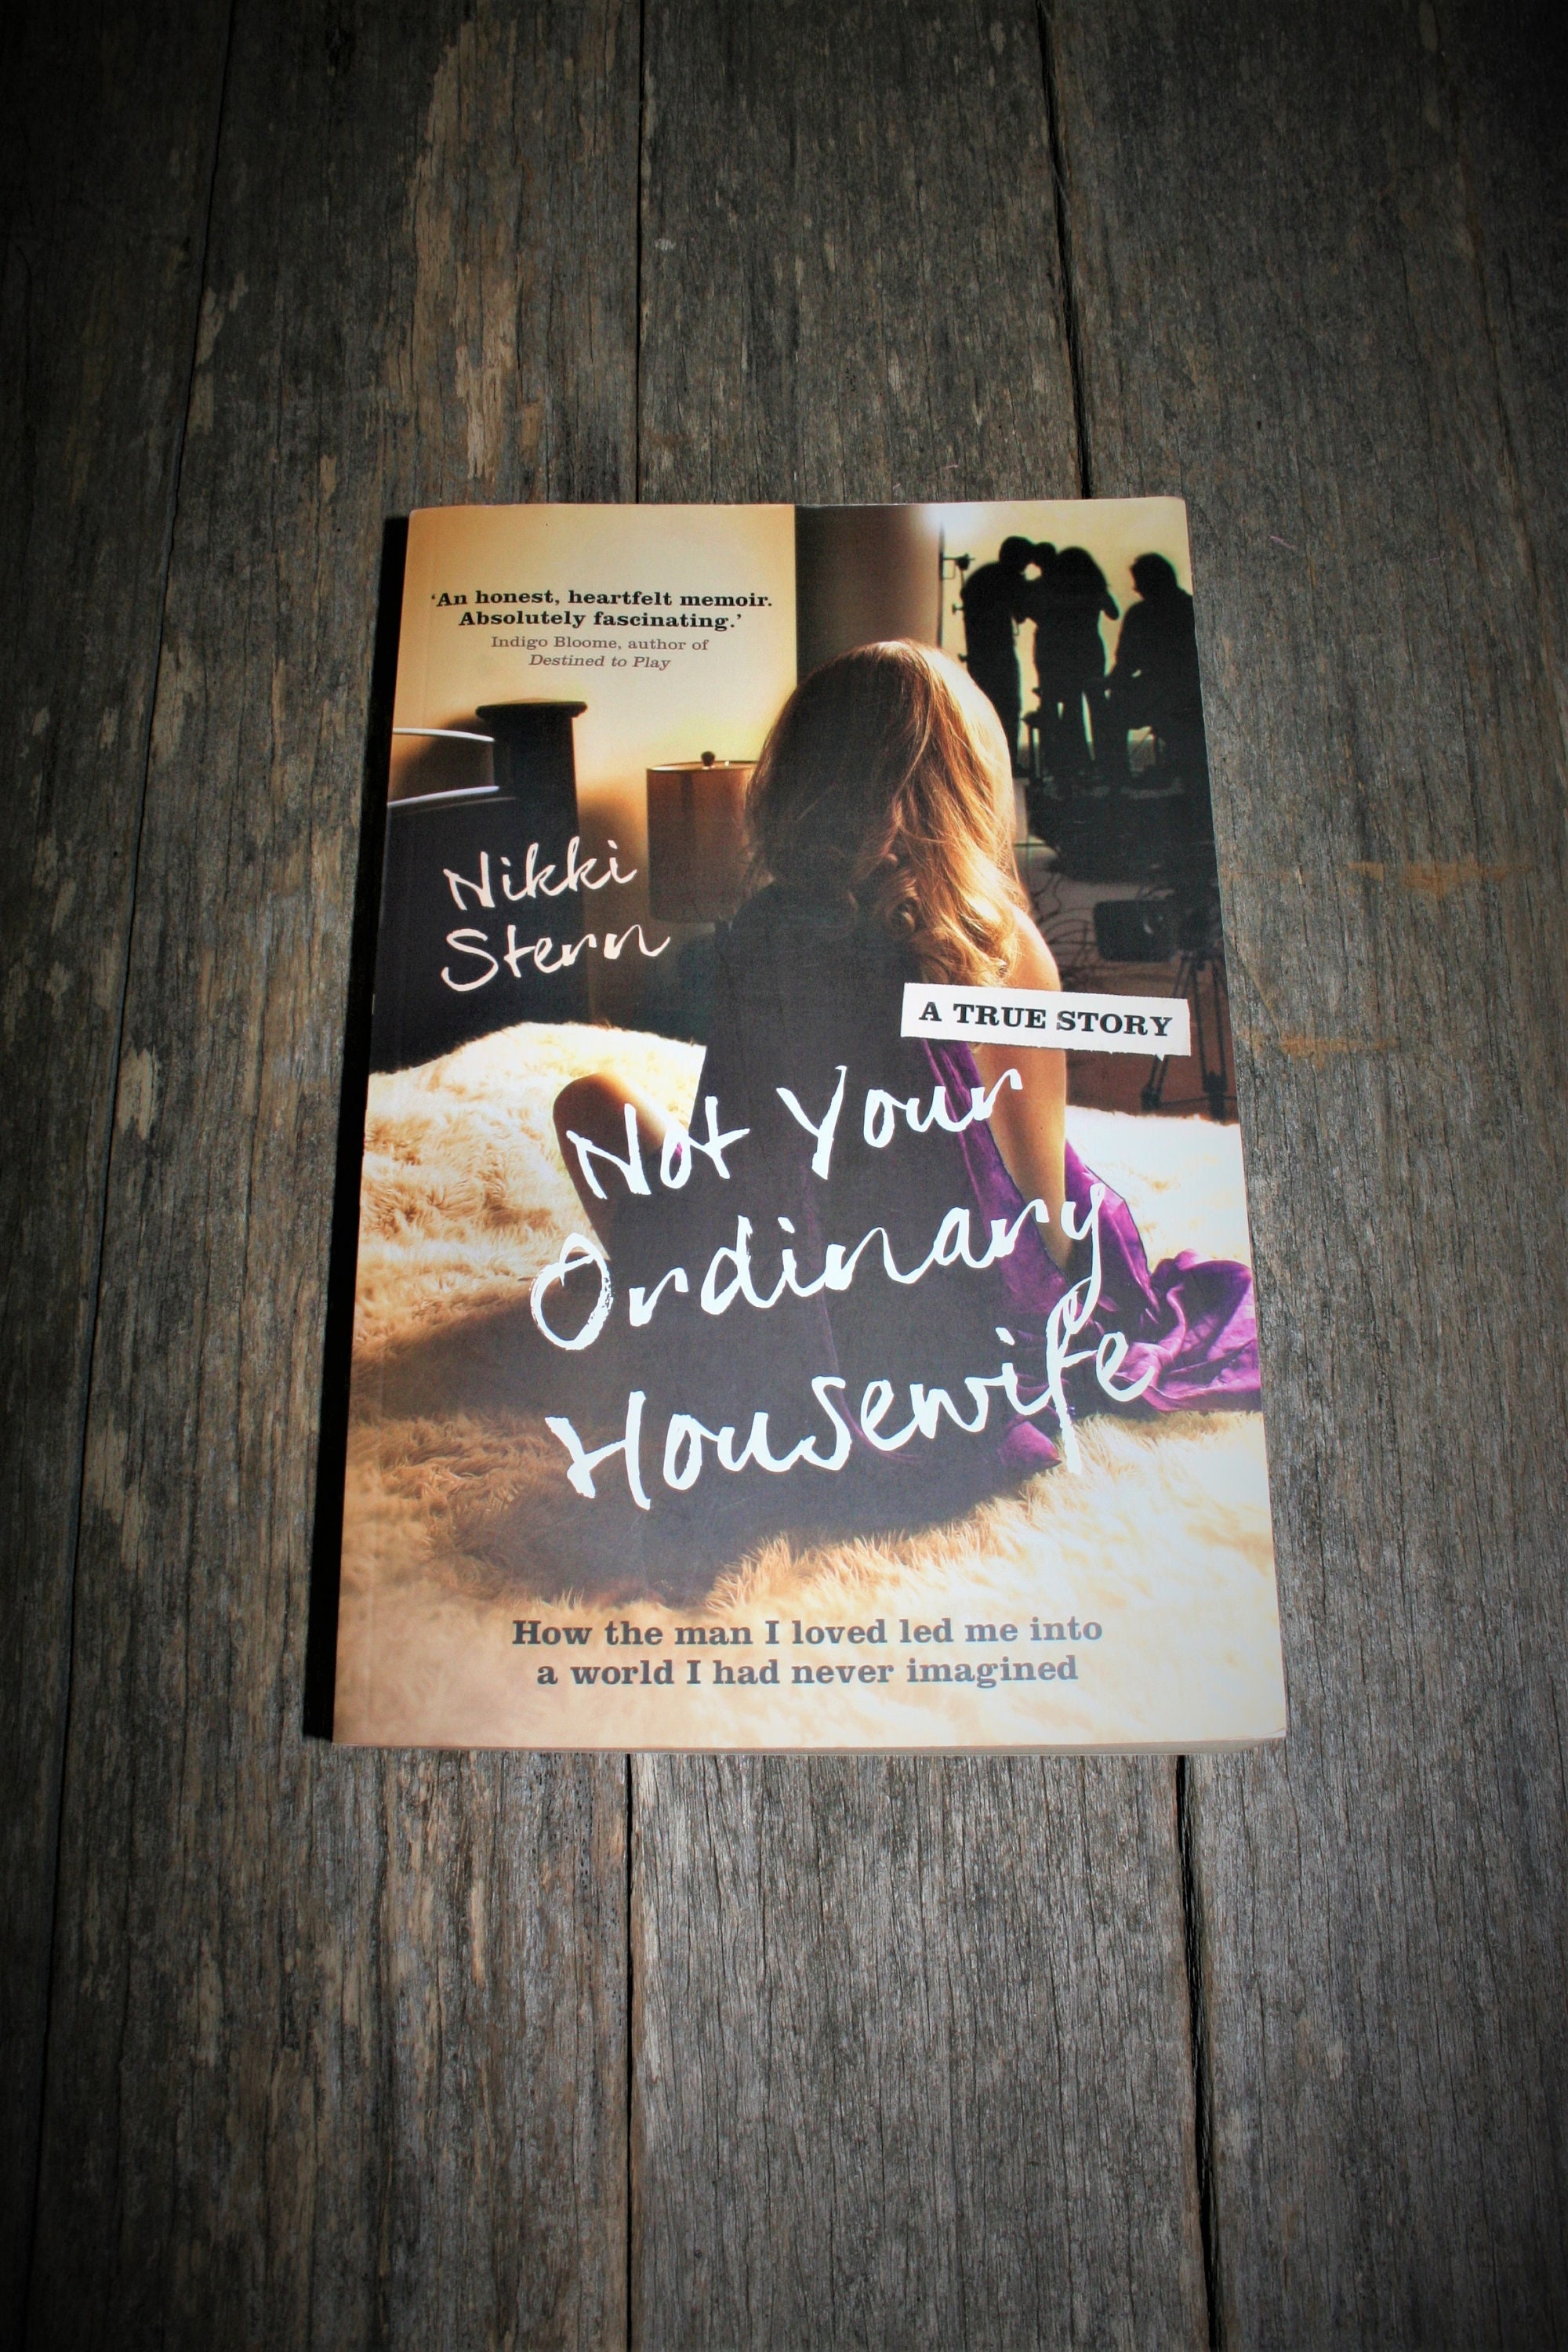 Not Your Ordinary Housewife by Nikki Stern A True Story